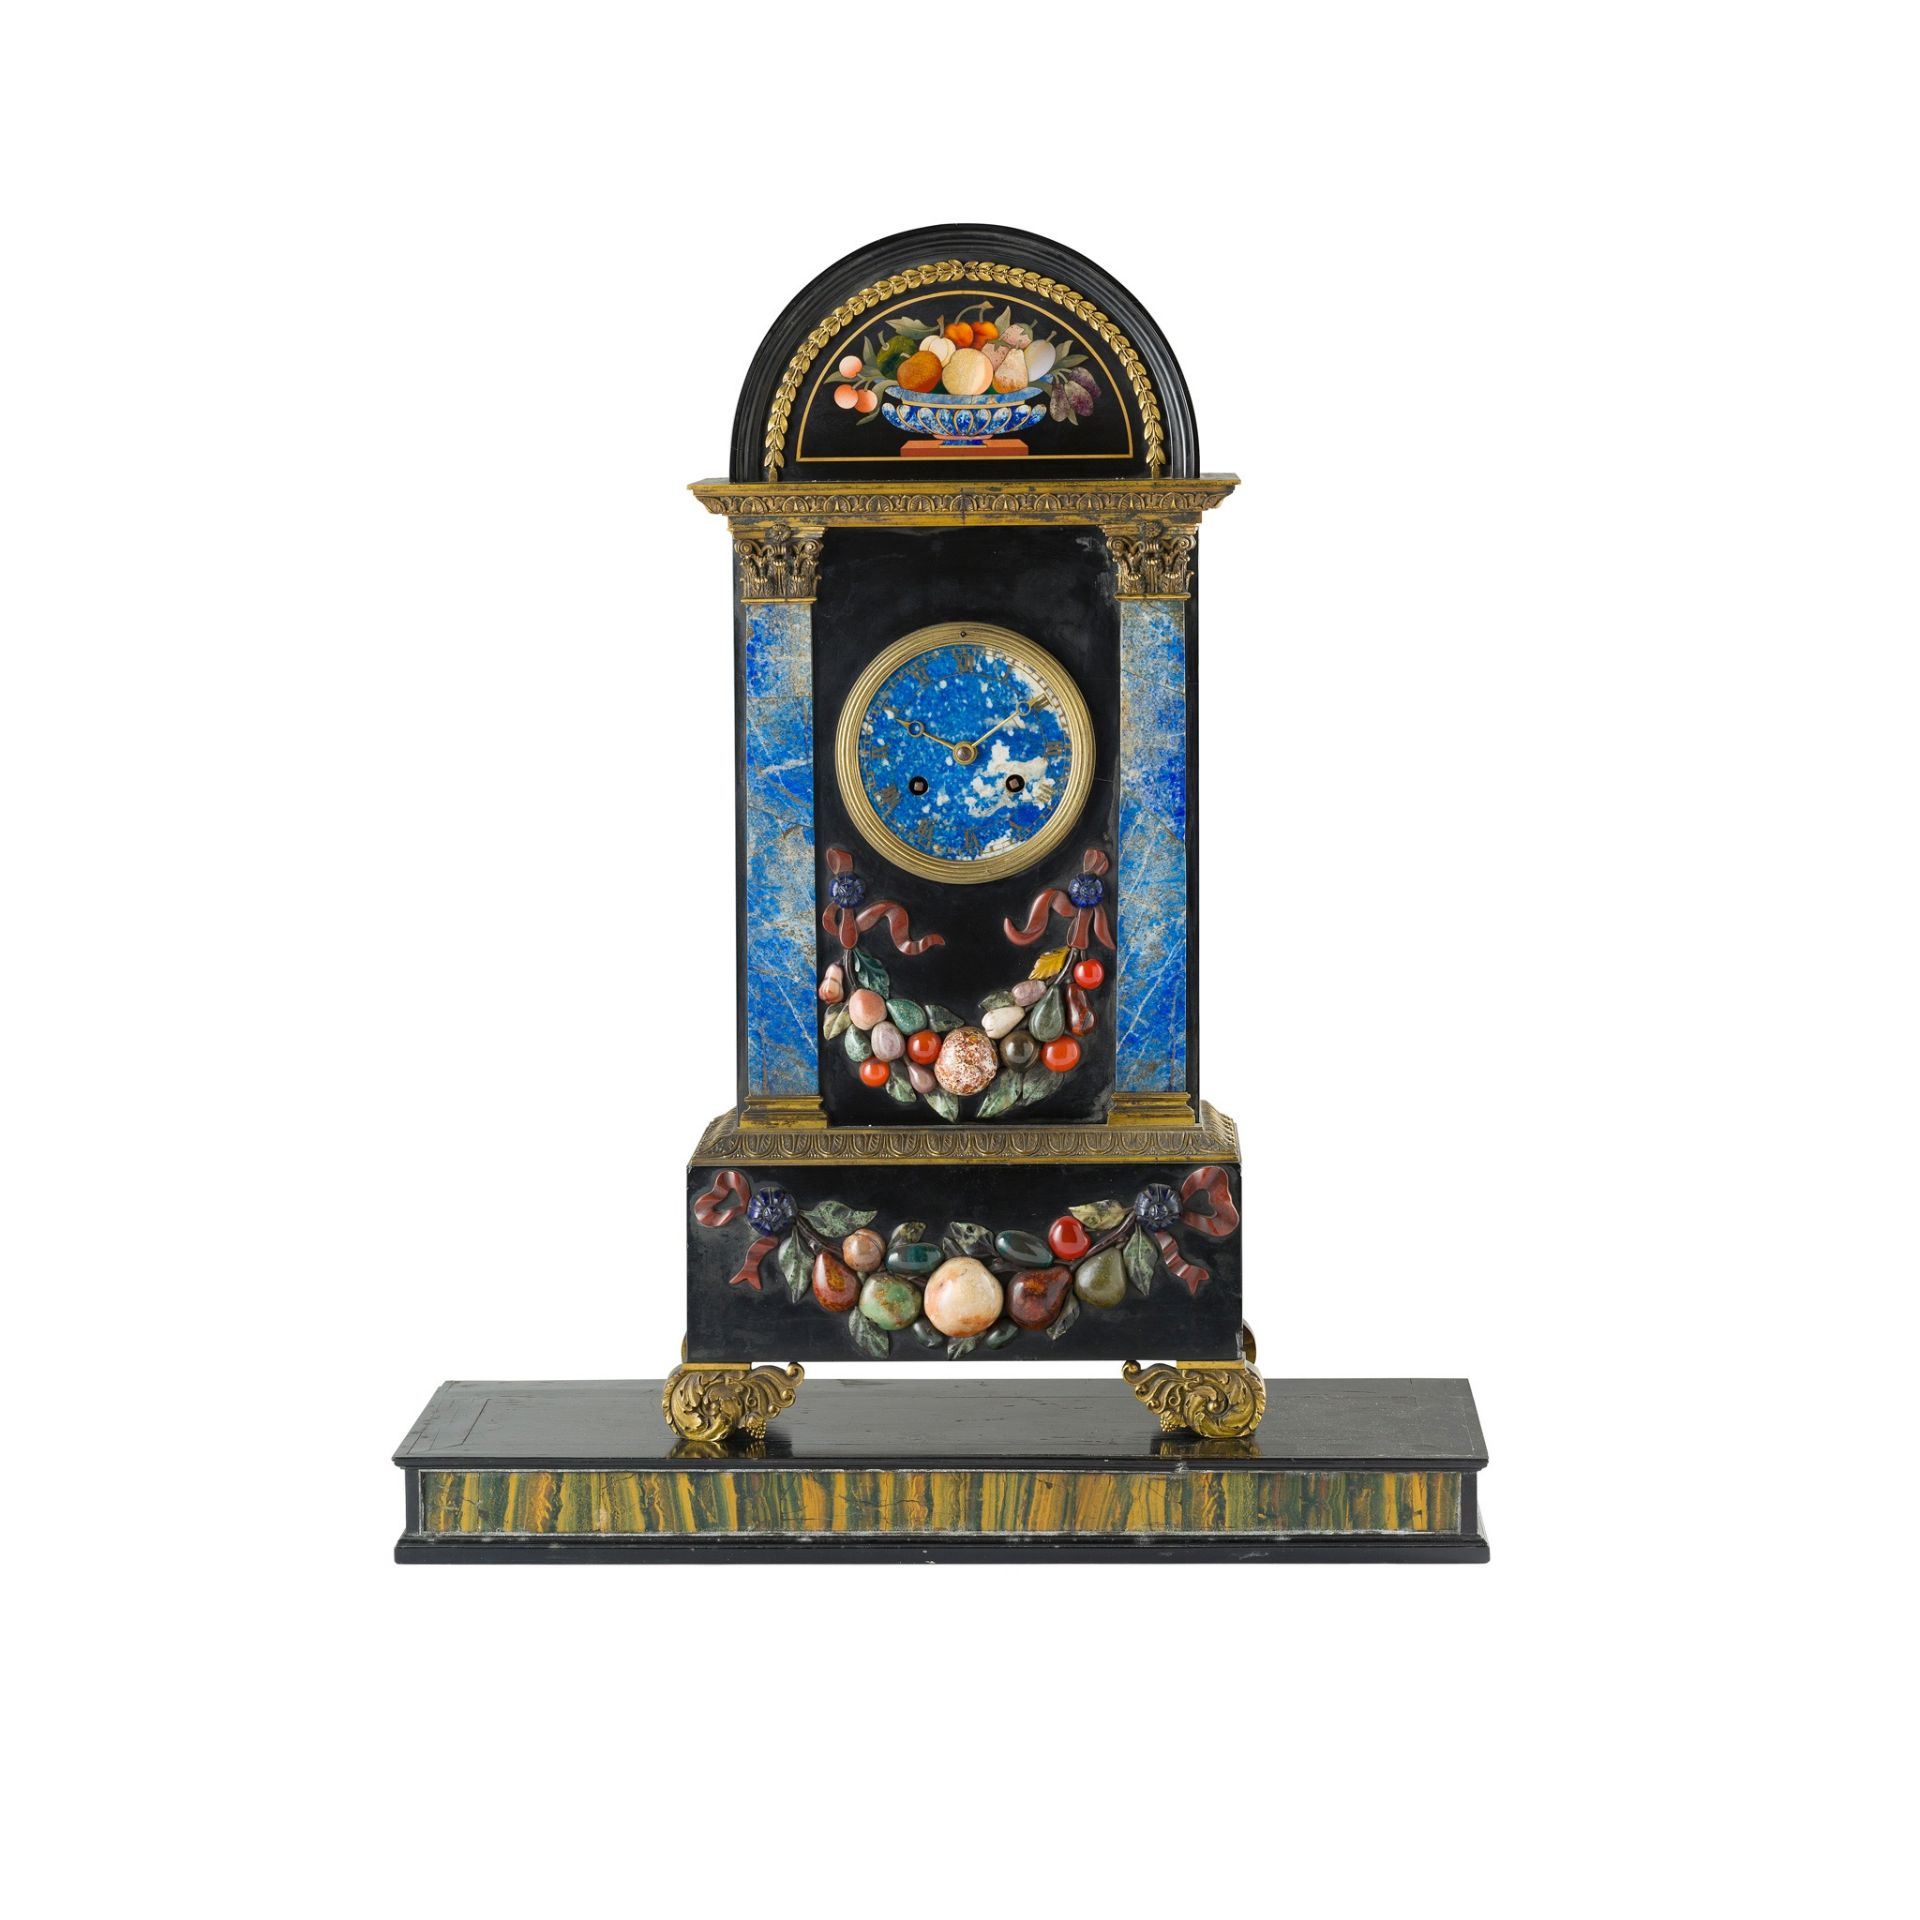 FRENCH FLORENTINE MARBLE AND PIETRA DURA MANTEL CLOCK, BY HUNZIKER, PARIS EARLY 19TH CENTURY